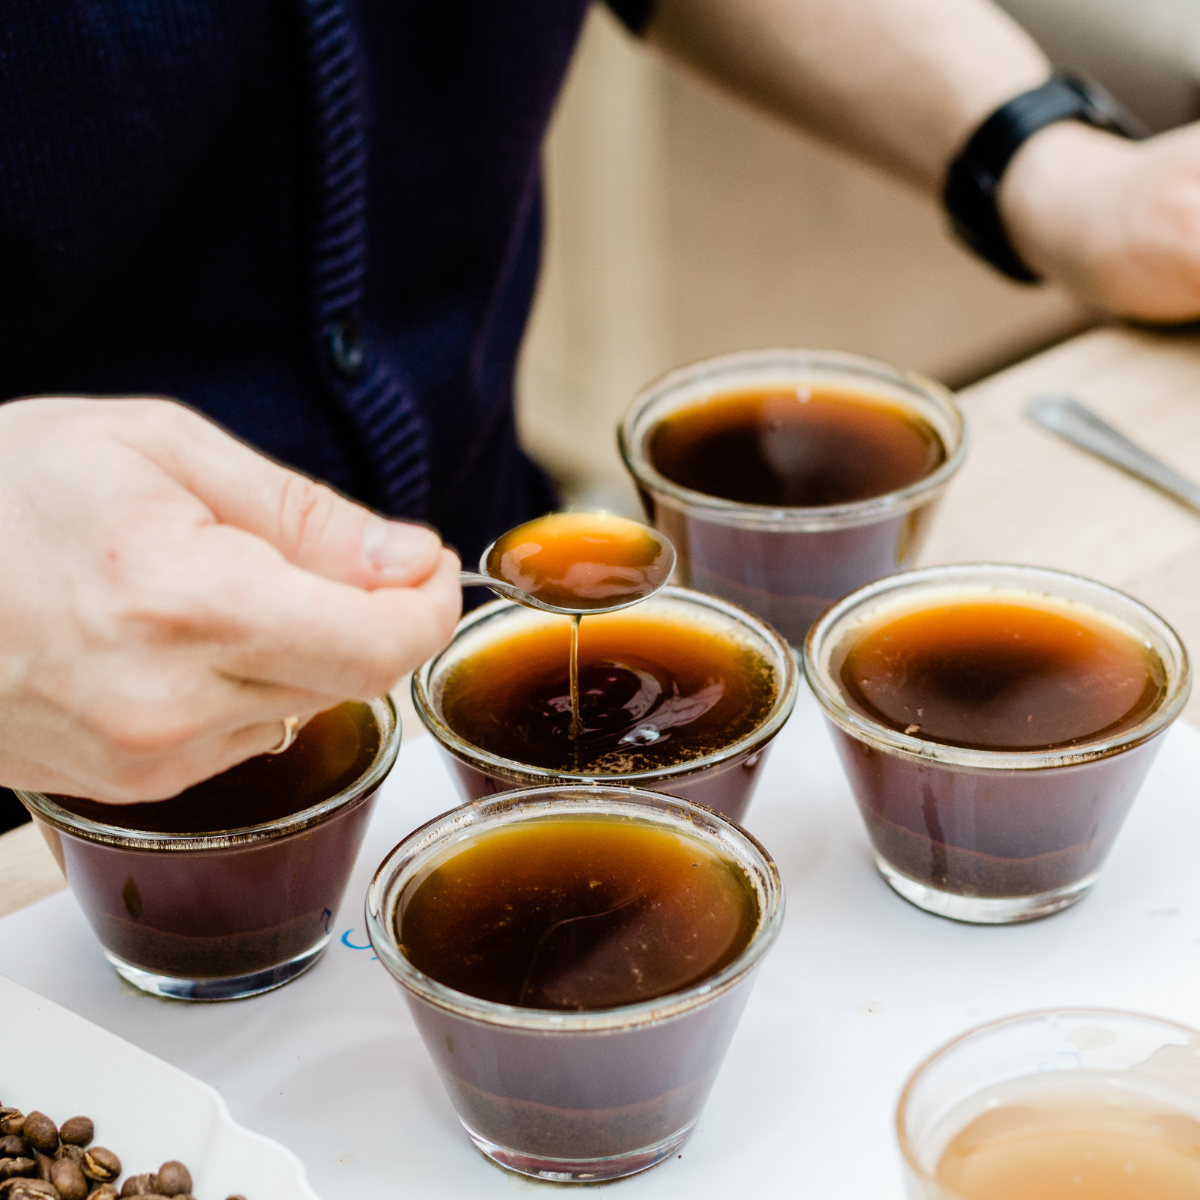 The cupping spoon, with its deep, wide bowl, is a specialized tool crafted for precise slurping and comprehensive evaluation of coffee.